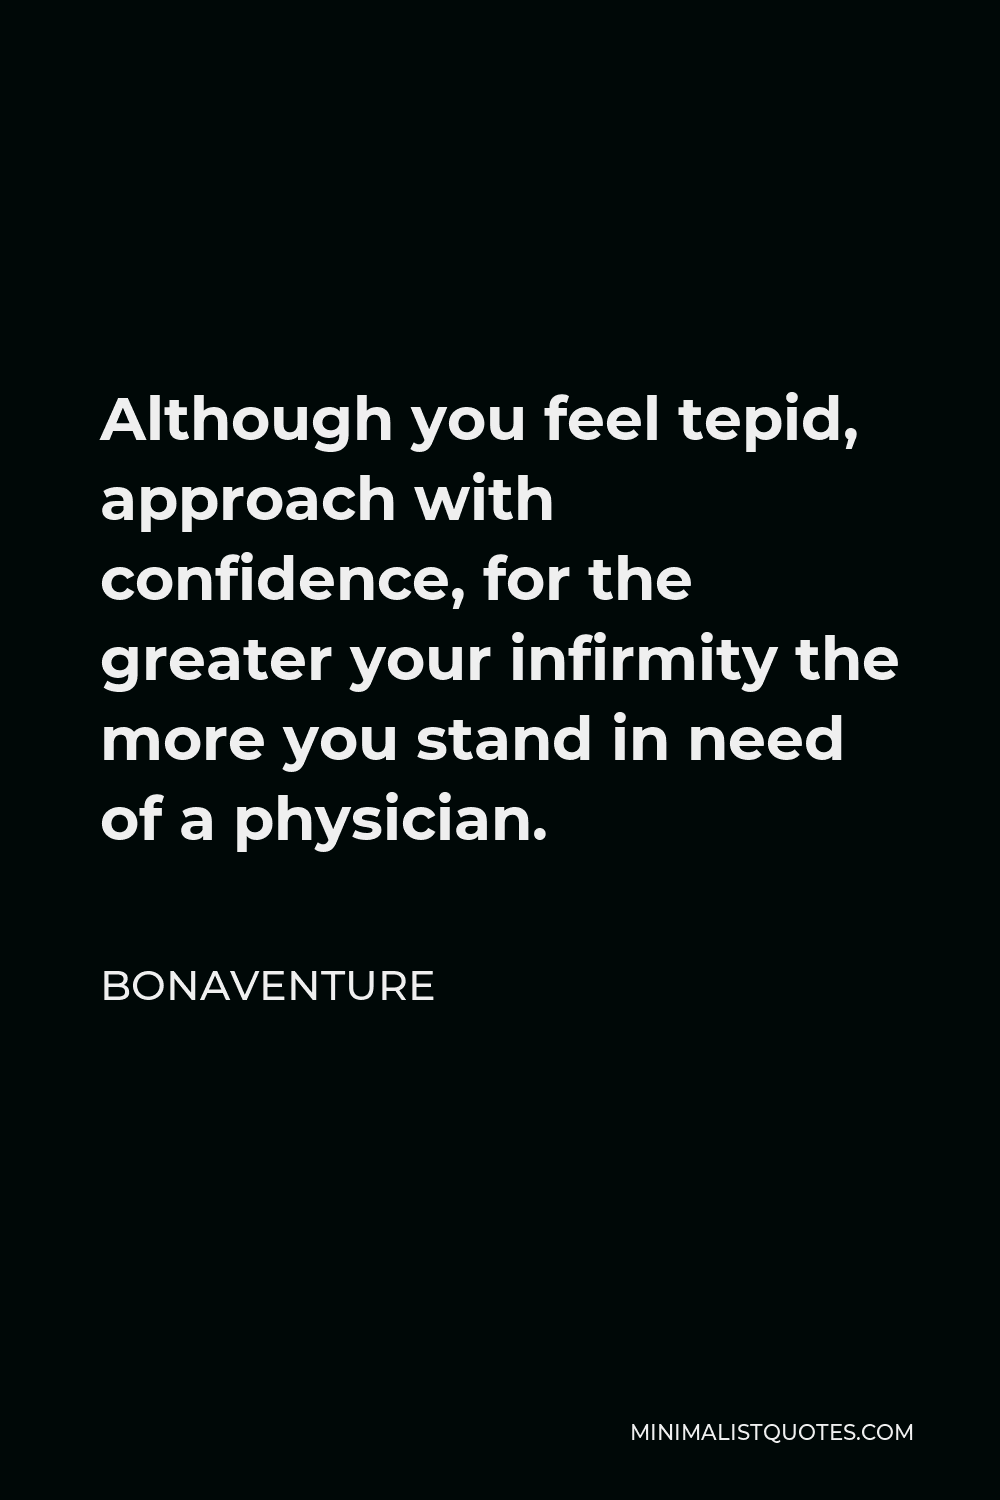 Bonaventure Quote - Although you feel tepid, approach with confidence, for the greater your infirmity the more you stand in need of a physician.